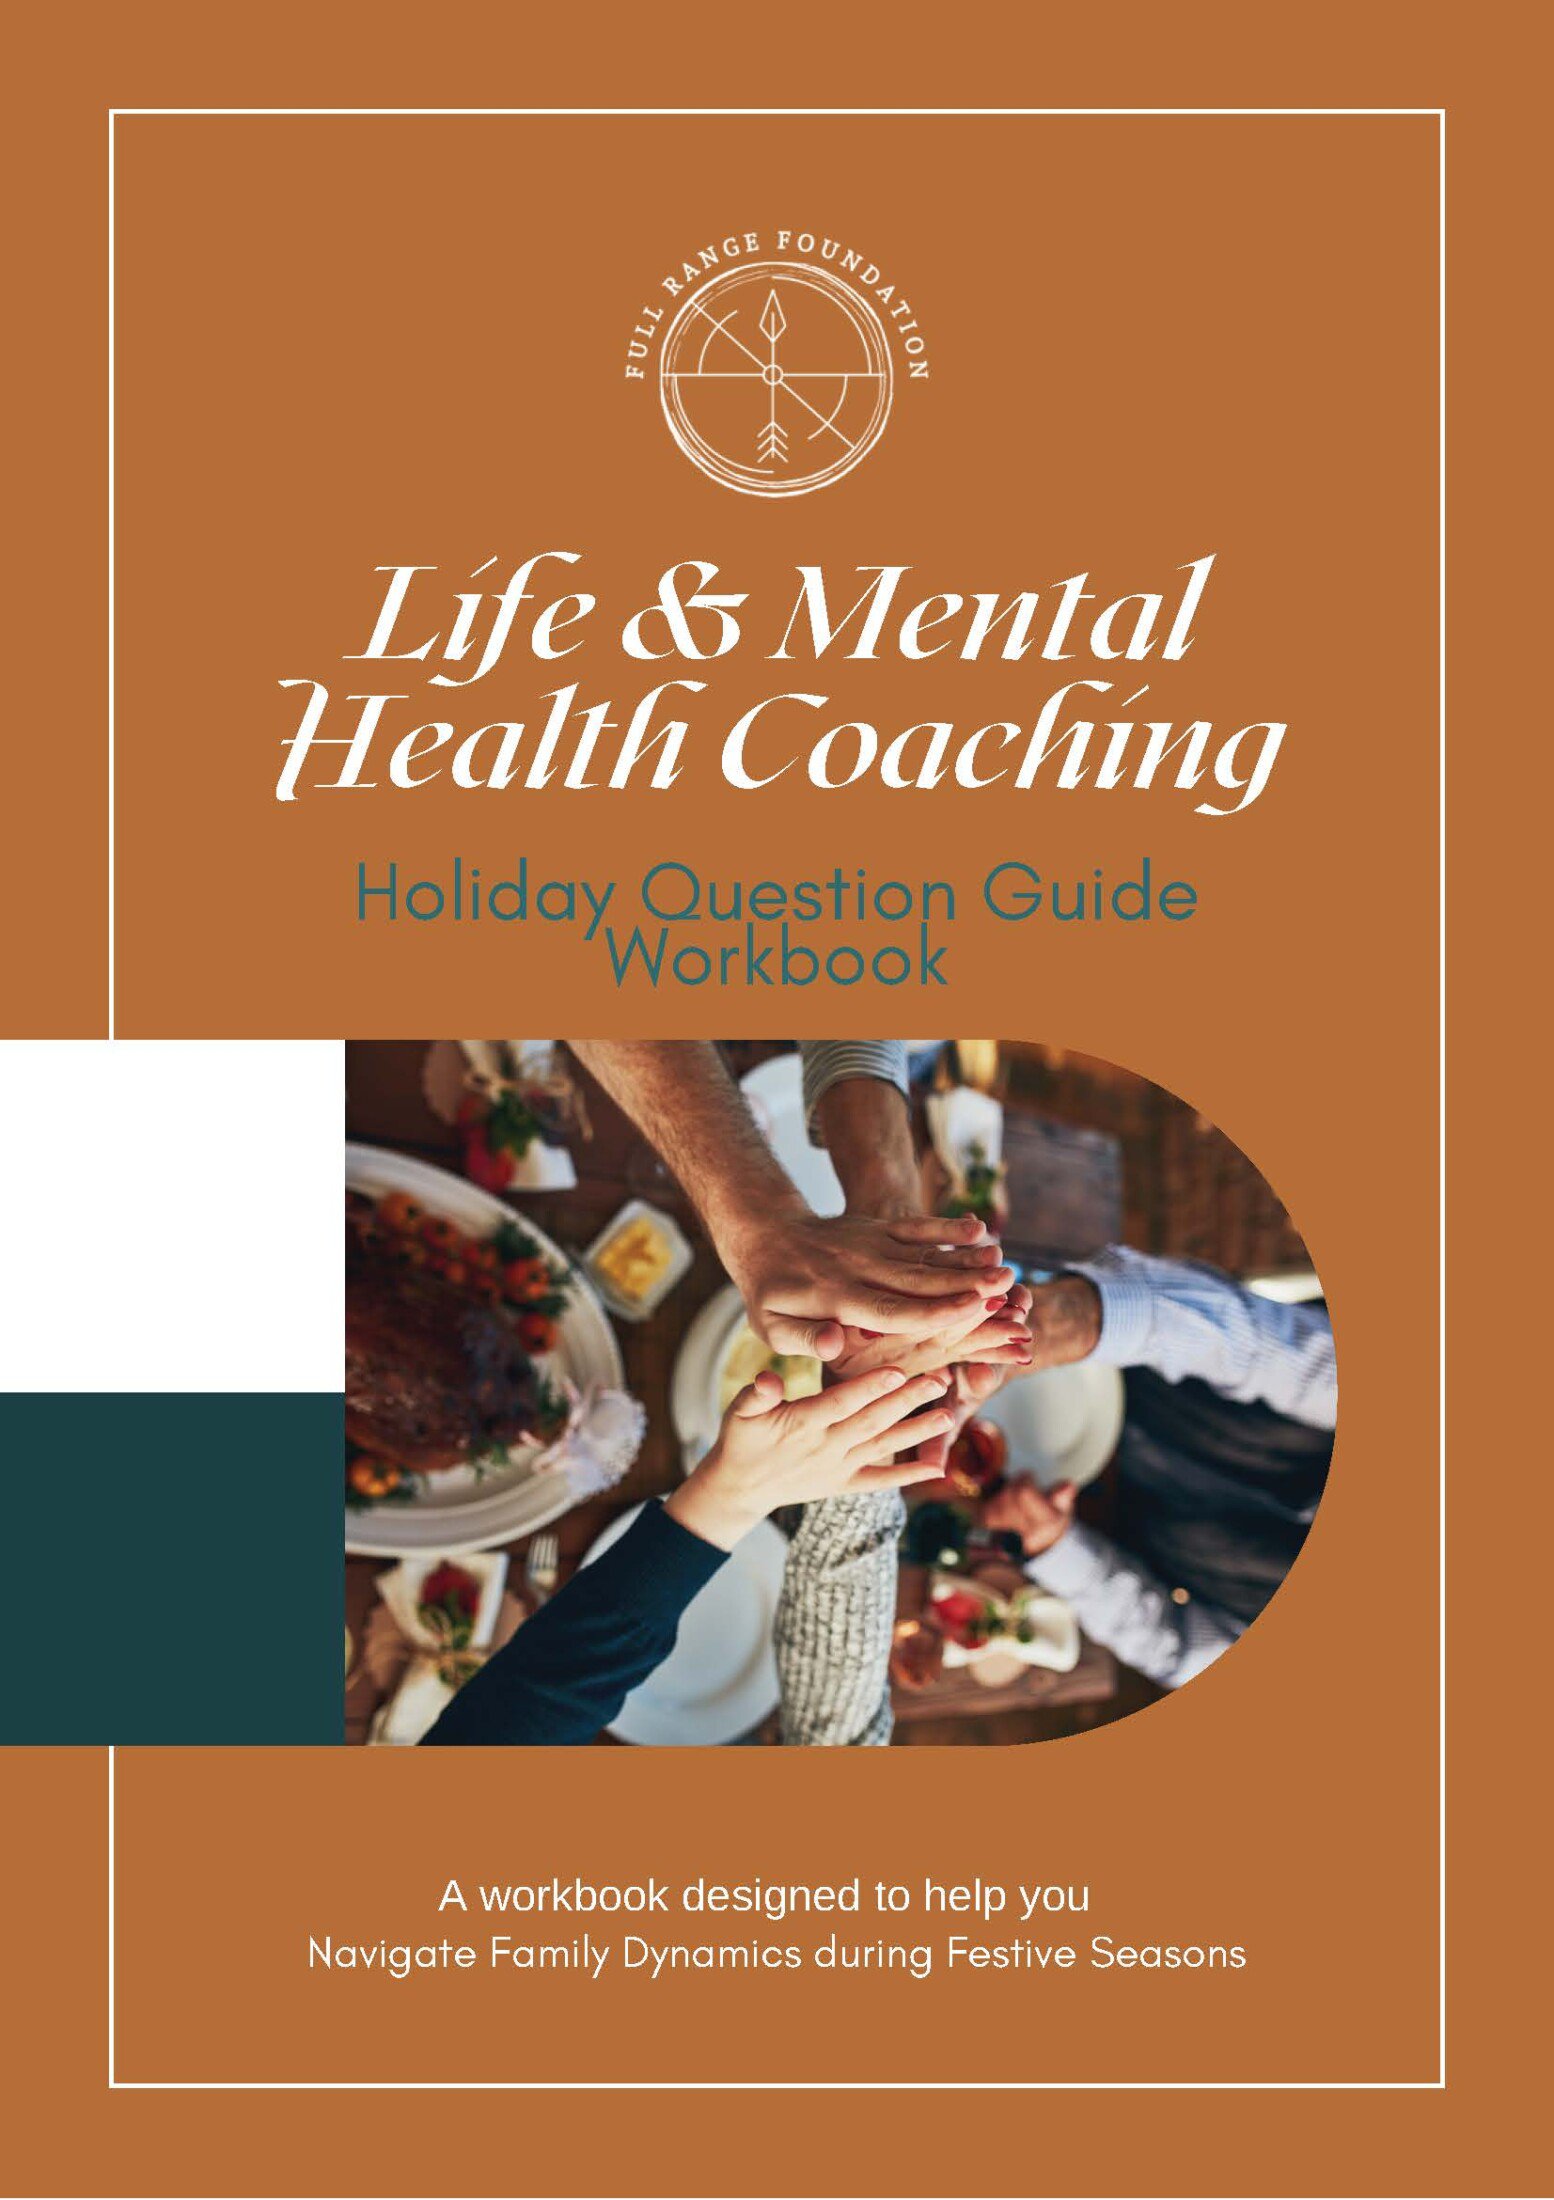 Cover-Life & Mental Health Coaching Holiday Question GUIDE.jpg